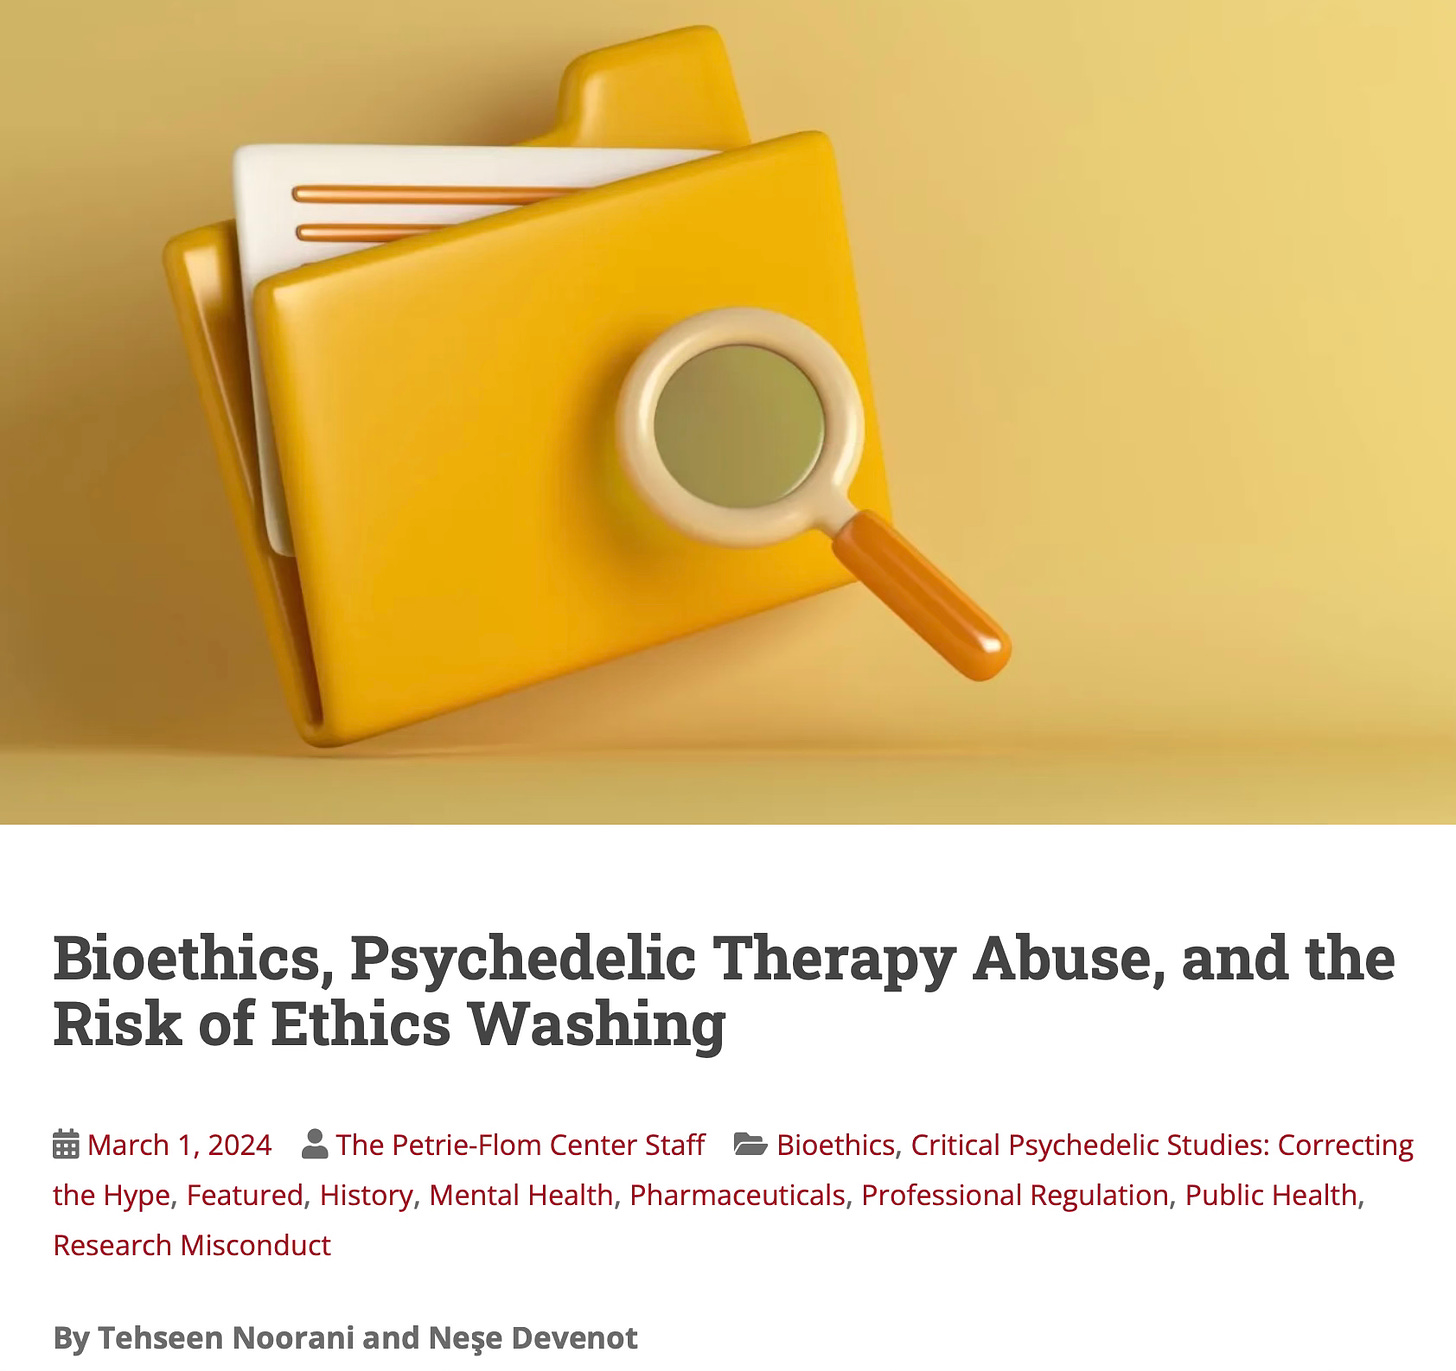 An article screenshot includes an illustrated file folder behind a magnifying glass as a header. The title reads "Bioethics, Psychedelic Therapy Abuse, and the Risk of Ethics Washing."